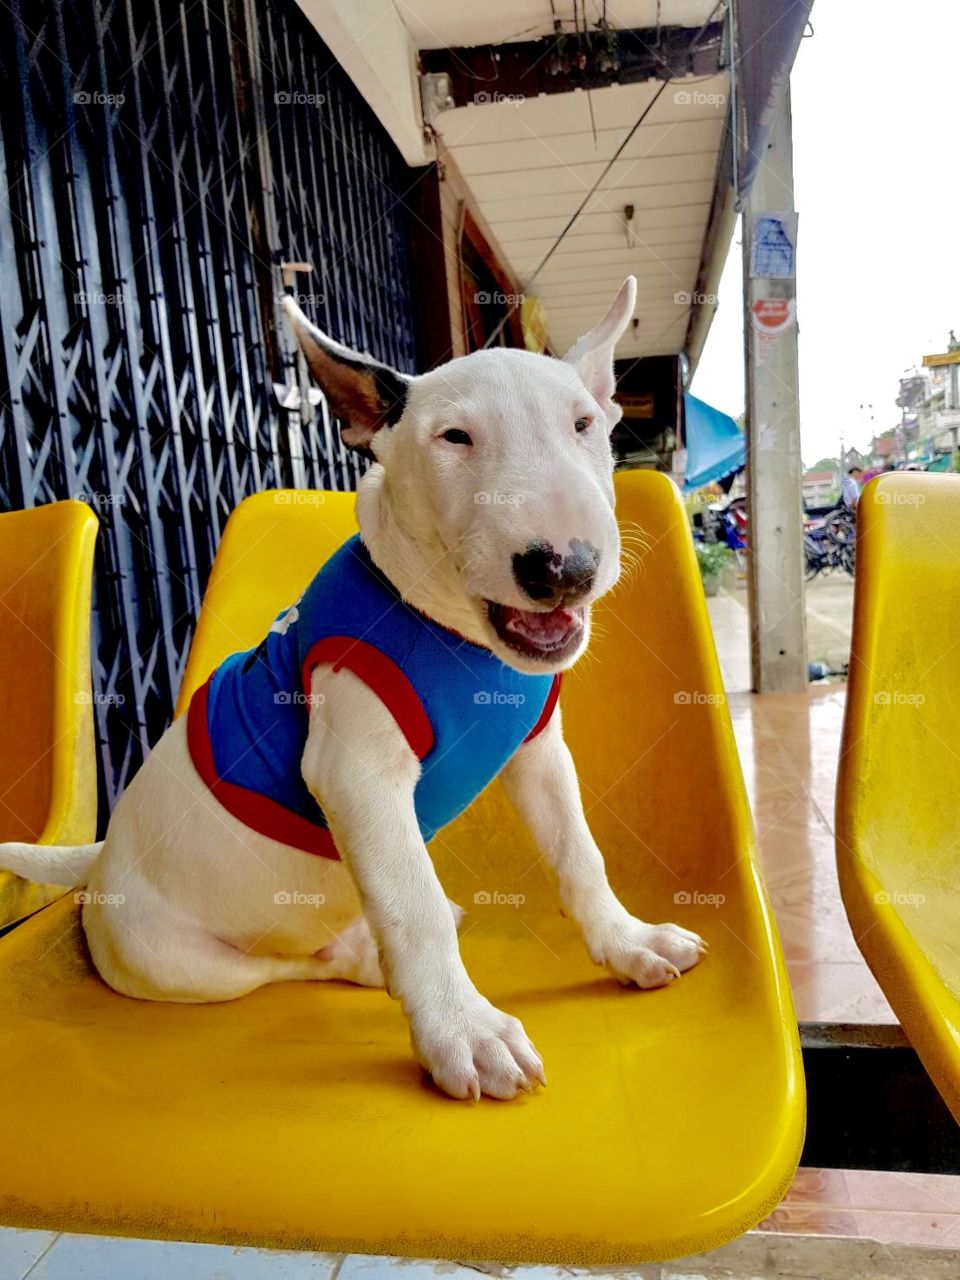 This is my bull terrier's name "Chopper"